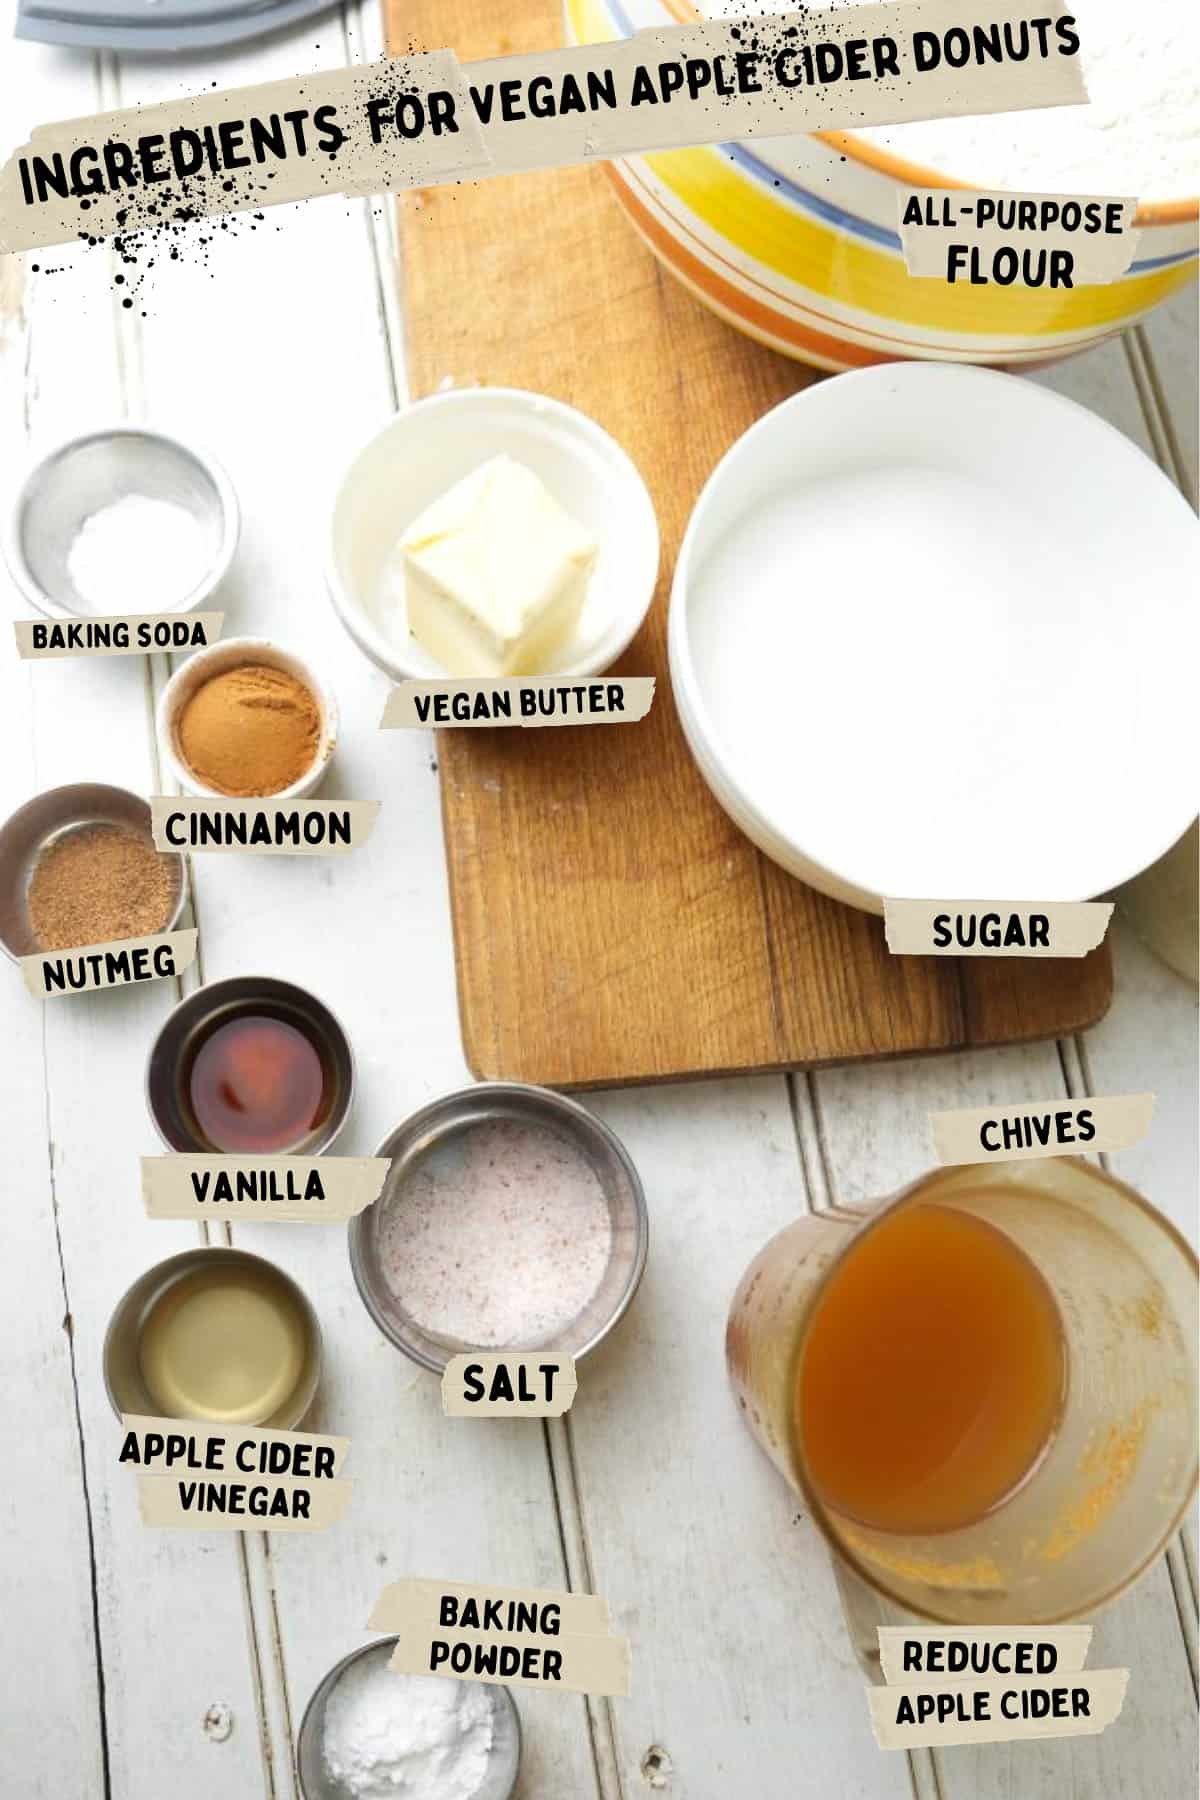 all ingredients for this recipe measured out in small cups: Apple cider
Fresh diced, peeled apple
vegan butter
egg replacer powder
sugar (evaporated cane juice)
soy milk
vanilla extract
apple cider vinegar
all-purpose flour
baking powder
baking soda
nutmeg
cinnamon
salt.